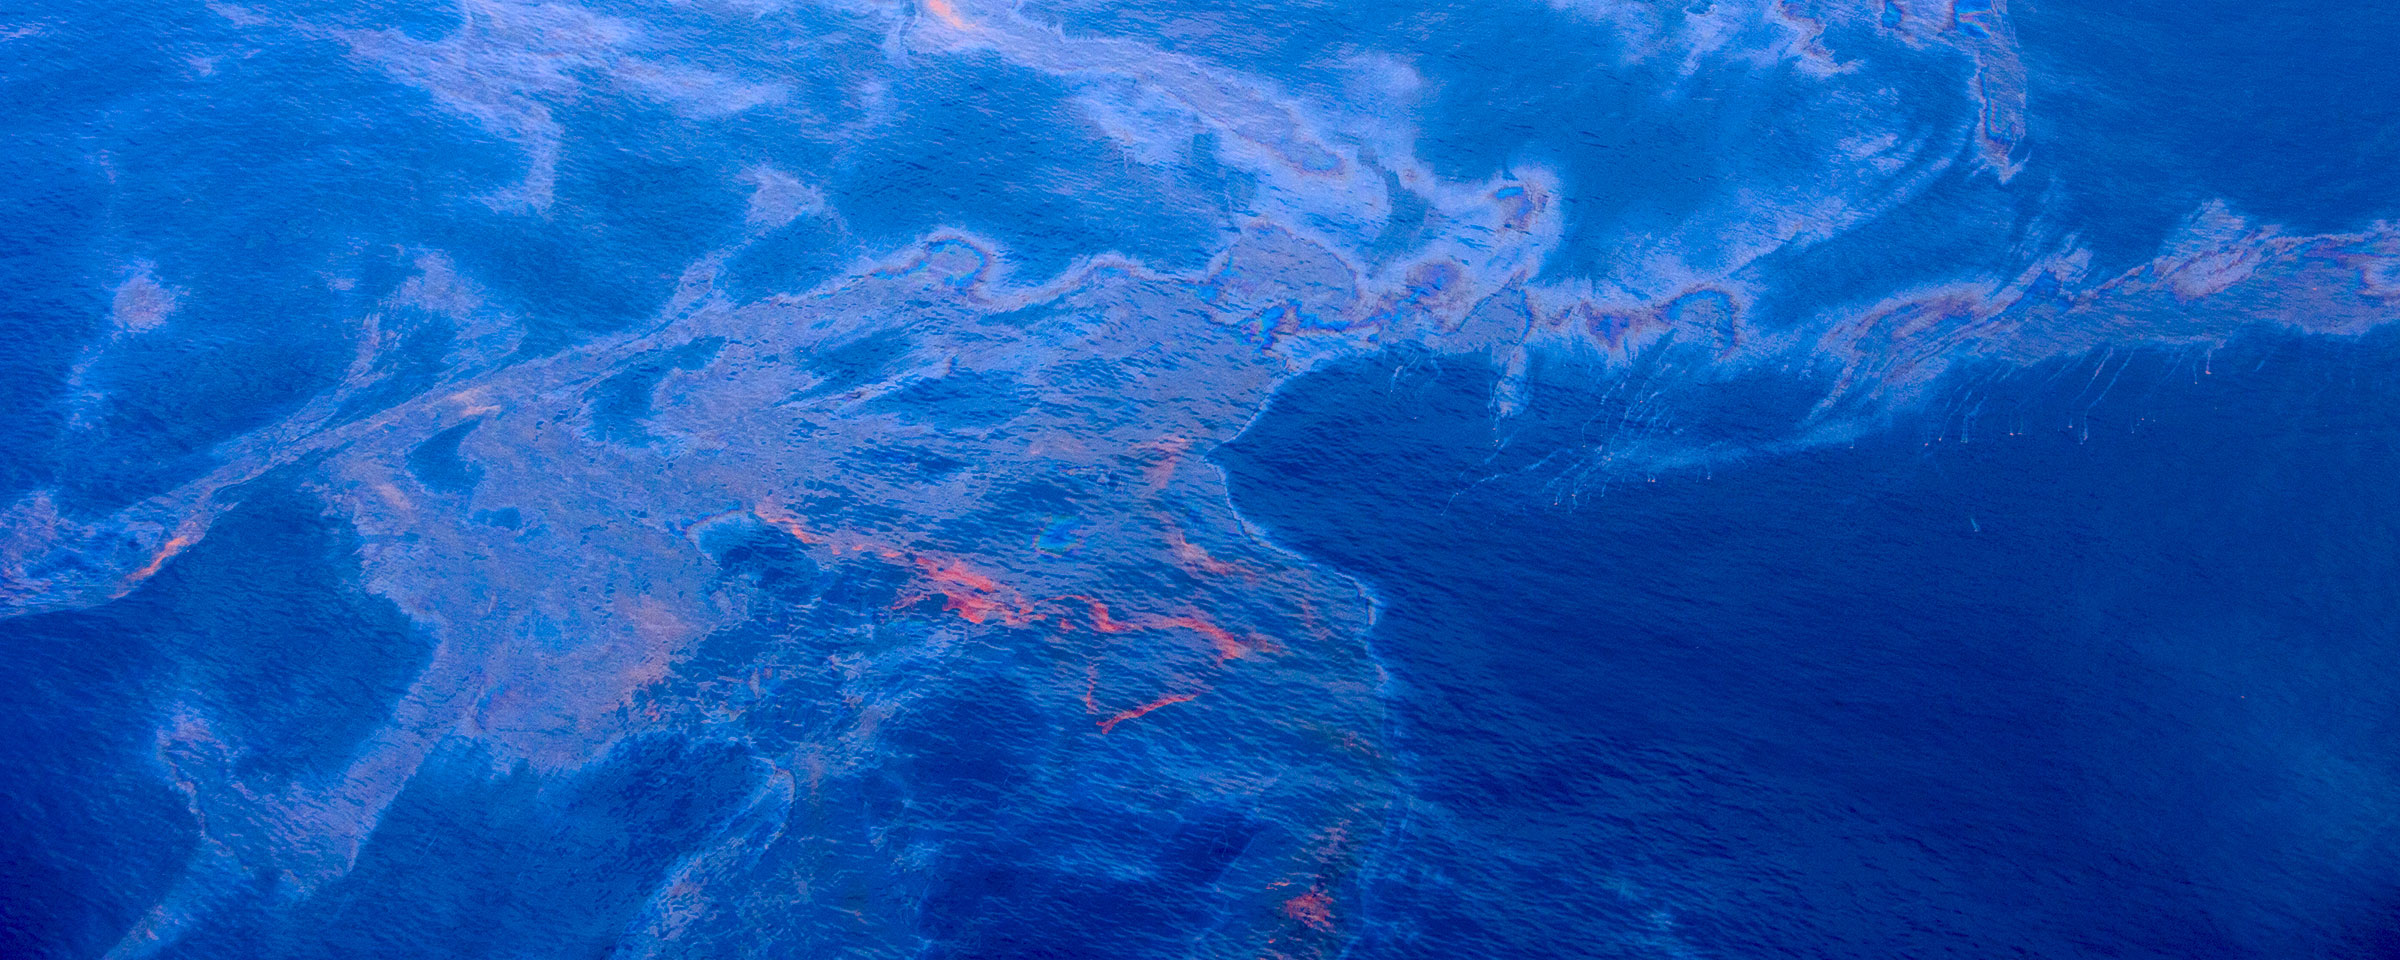 Aerial view of the ocean with distinct discoloration showing the depths of the ocean